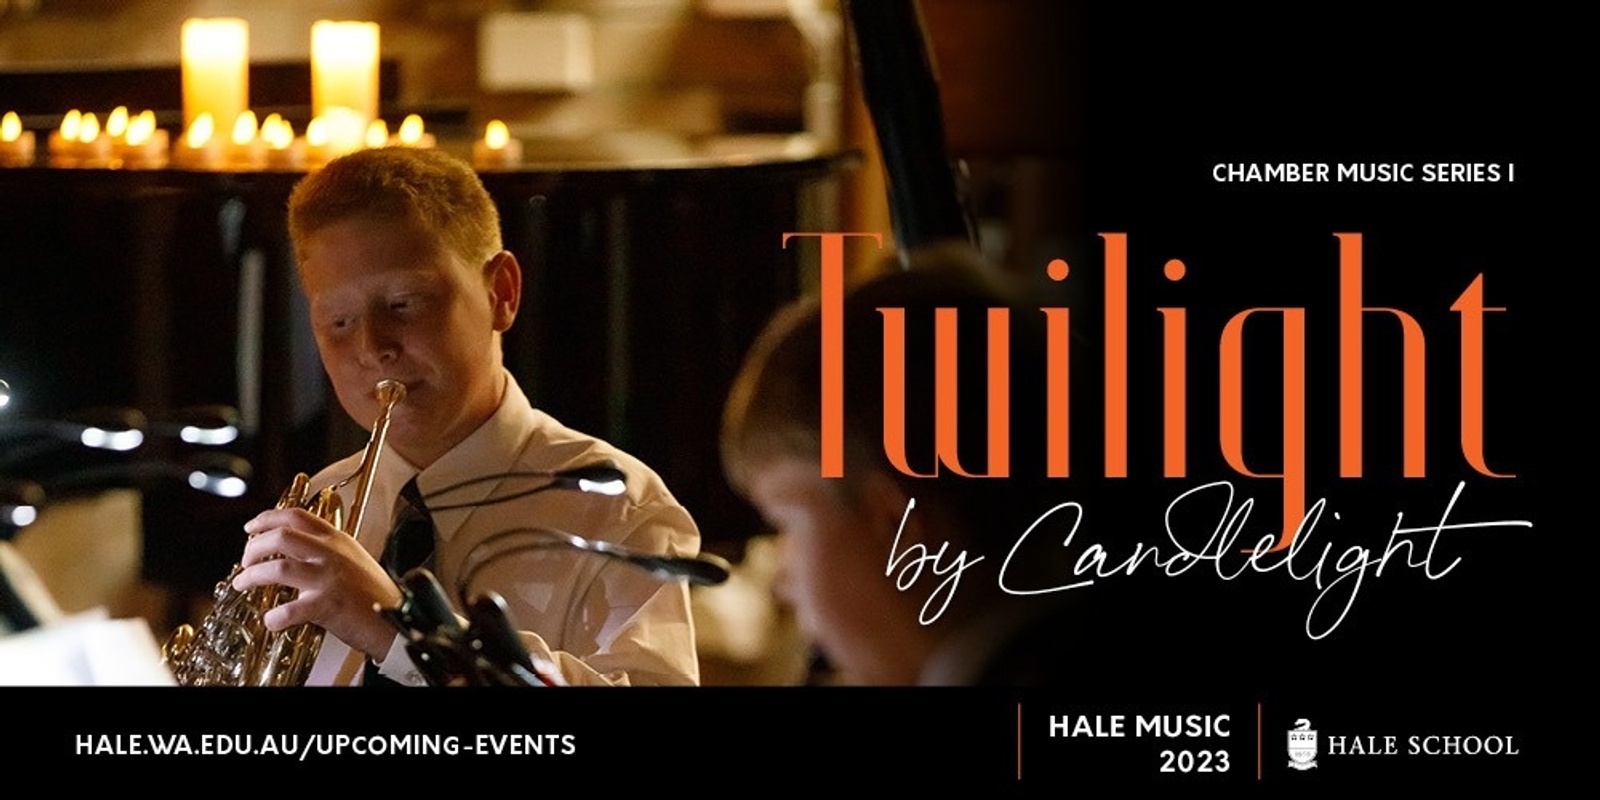 Banner image for Twilight by Candlelight - Chamber Series 1 2023